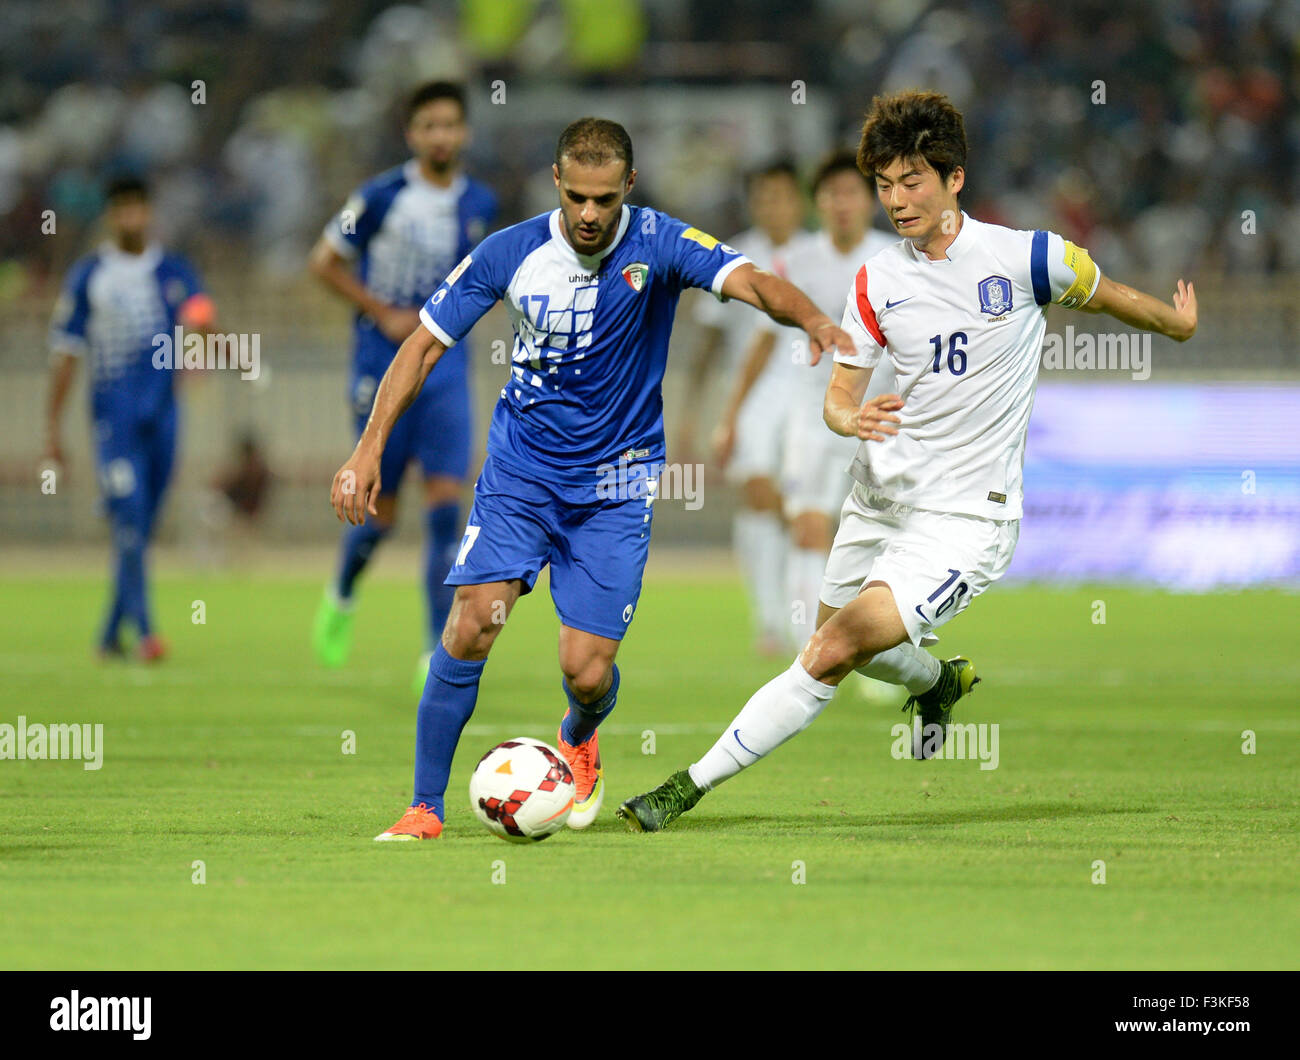 (151009) -- KUWAIT, Oct. 9, 2015, (Xinhua) -- Bader al Al-Motawa (L) of Kuwait vies with Ki Sung-yueng of South Korea during the qualifying match for the 2018 FIFA World Cup and the AFC Asian Cup UAE 2019 in Kuwait City, Kuwait, on Oct. 8, 2015. South Korea won 1-0. (Xinhua/Noufal Ibrahim) Stock Photo